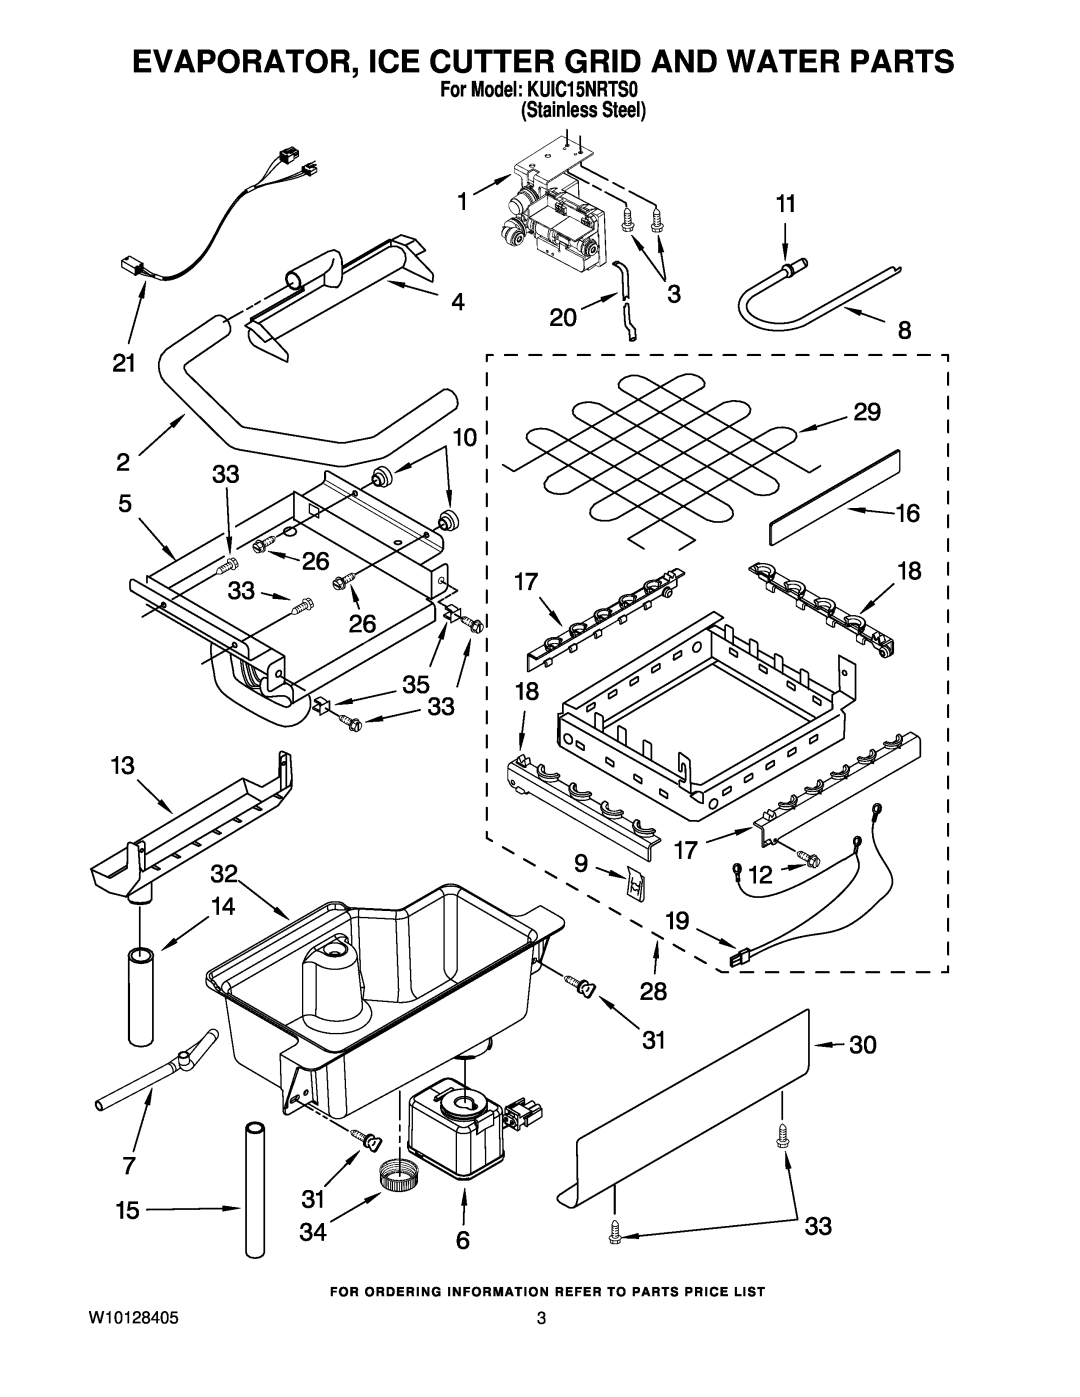 KitchenAid manual Evaporator, Ice Cutter Grid And Water Parts, W10128405, For Model KUIC15NRTS0 Stainless Steel 